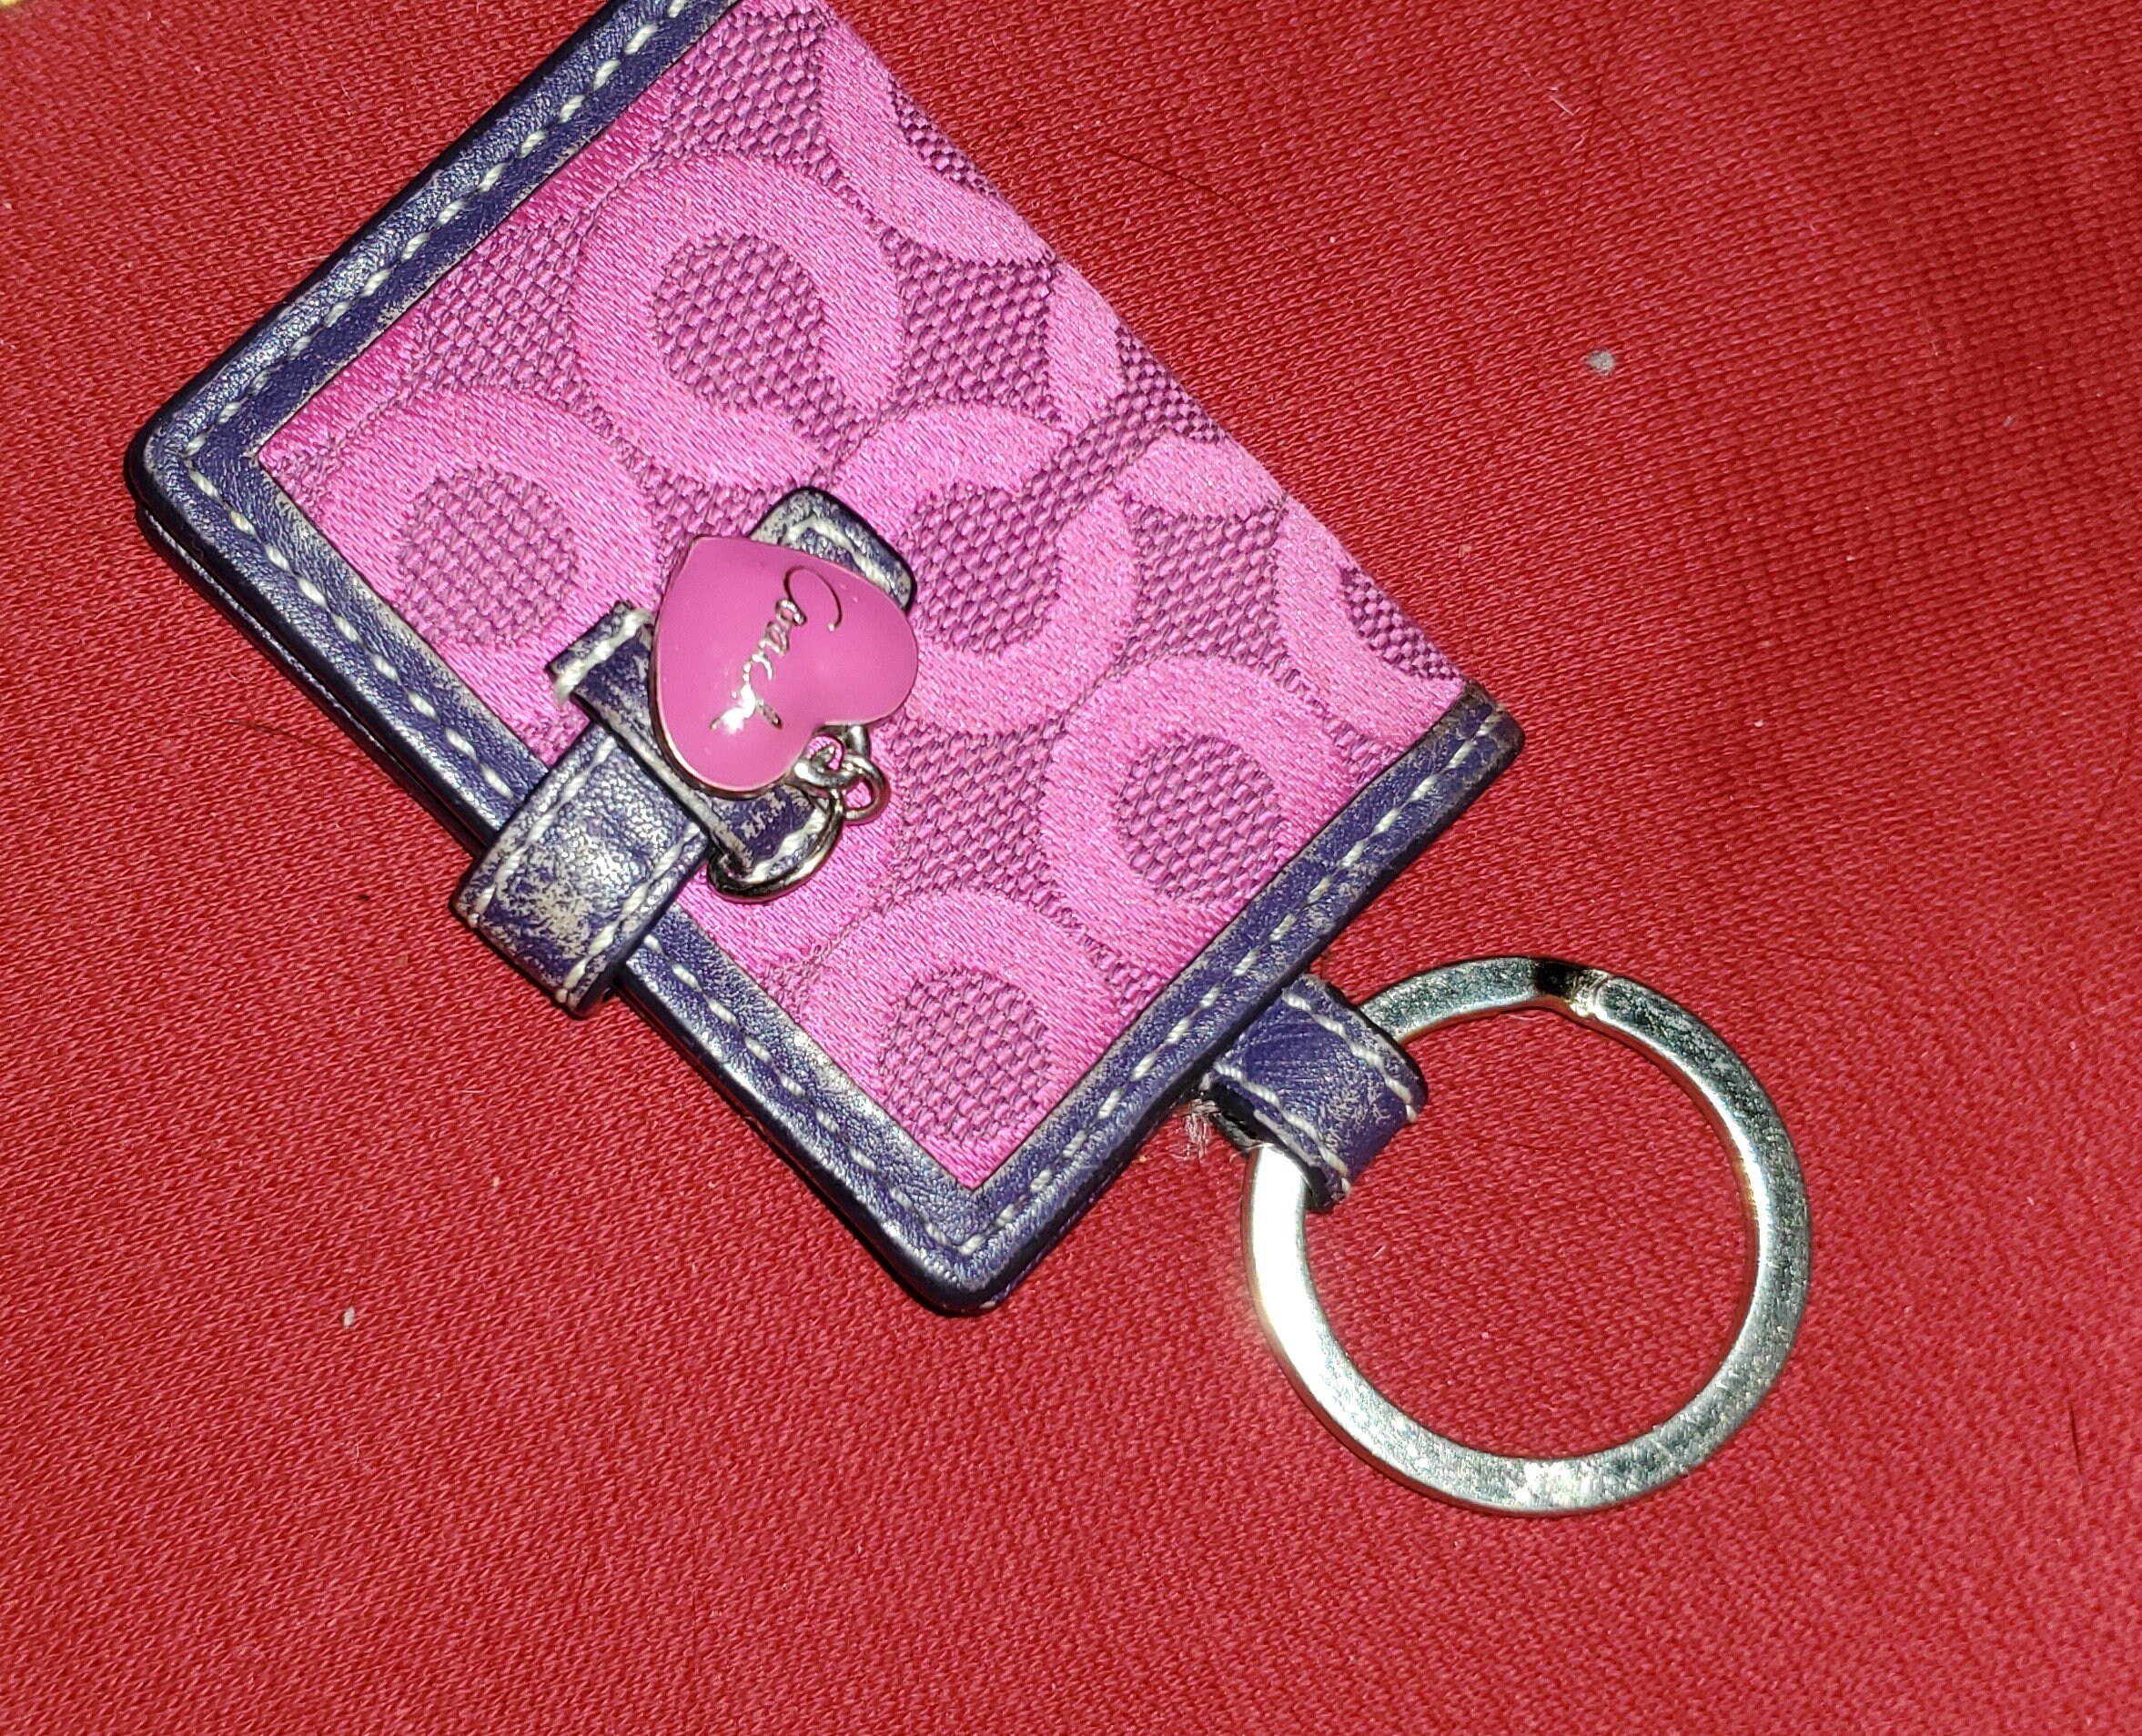 COACH Willow Floral Flower Bag Charm Key Ring Chain Leather Pink Japan  [Used]